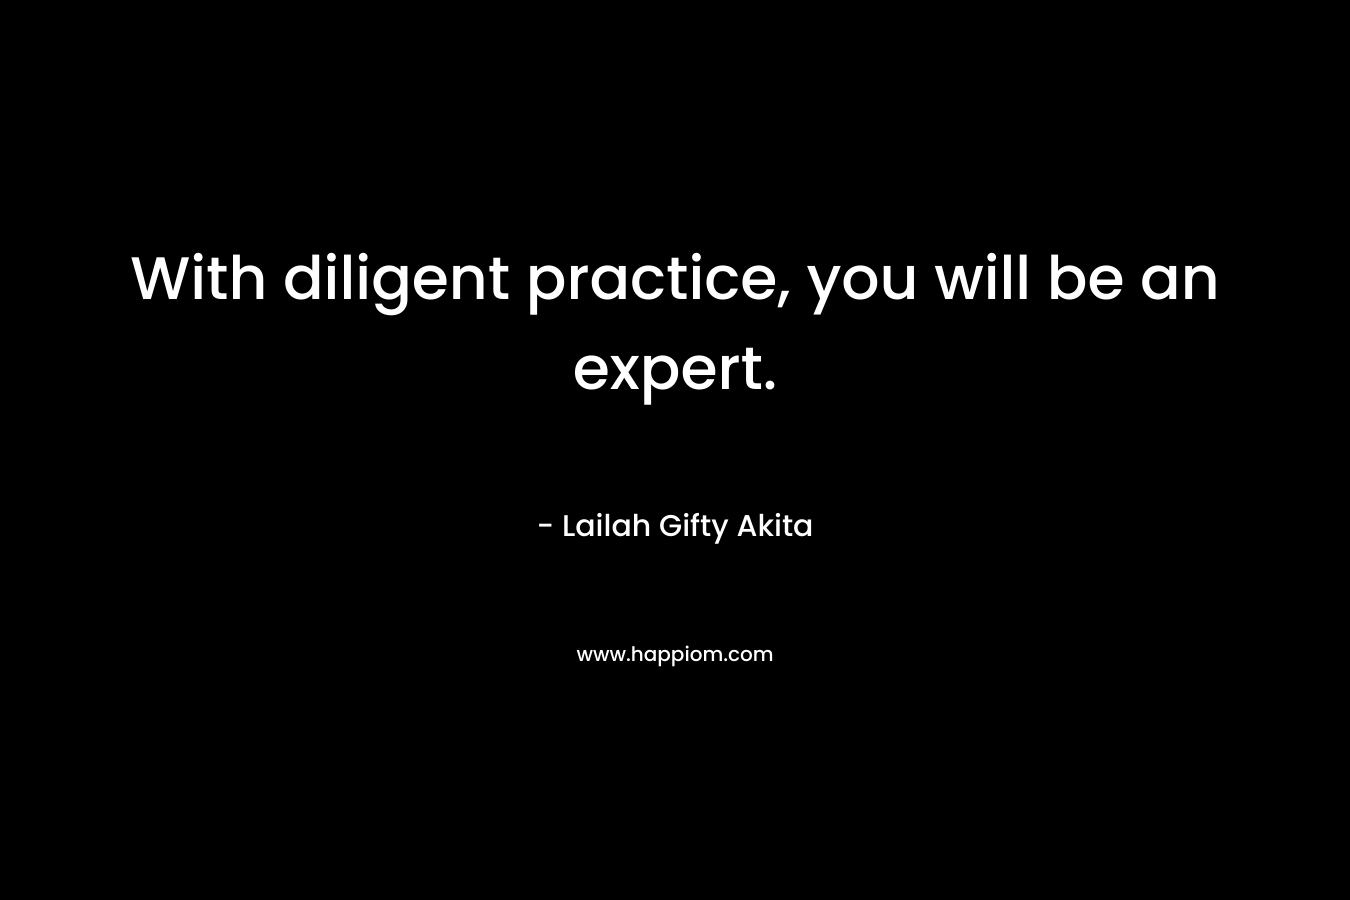 With diligent practice, you will be an expert.